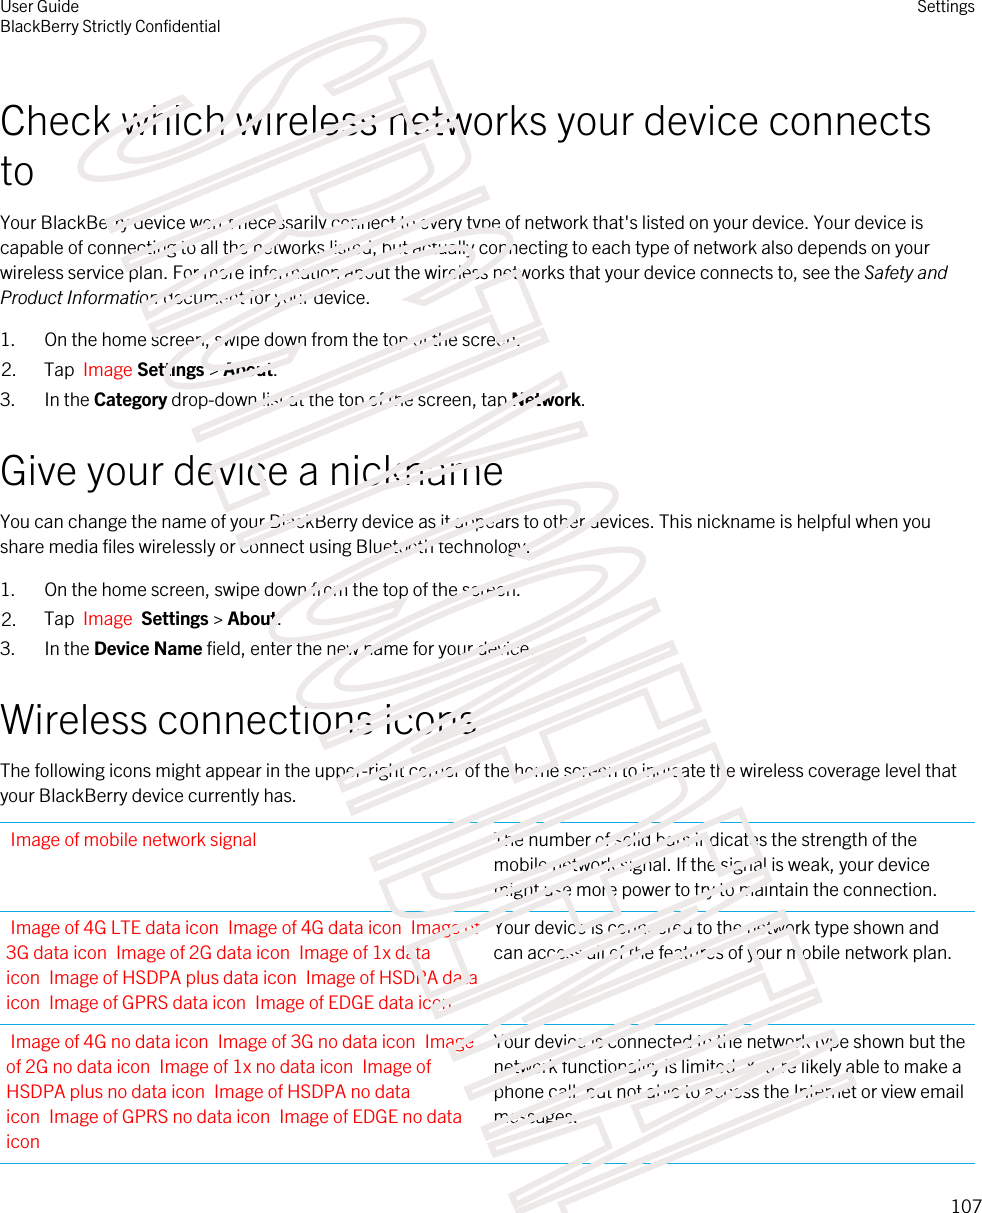 Check which wireless networks your device connects toYour BlackBerry device won&apos;t necessarily connect to every type of network that&apos;s listed on your device. Your device is capable of connecting to all the networks listed, but actually connecting to each type of network also depends on your wireless service plan. For more information about the wireless networks that your device connects to, see the Safety and Product Information document for your device.1. On the home screen, swipe down from the top of the screen.2. Tap  Image Settings &gt; About.3. In the Category drop-down list at the top of the screen, tap Network.Give your device a nicknameYou can change the name of your BlackBerry device as it appears to other devices. This nickname is helpful when you share media files wirelessly or connect using Bluetooth technology.1. On the home screen, swipe down from the top of the screen.2. Tap  Image  Settings &gt; About.3. In the Device Name field, enter the new name for your device.Wireless connections iconsThe following icons might appear in the upper-right corner of the home screen to indicate the wireless coverage level that your BlackBerry device currently has.Image of mobile network signal The number of solid bars indicates the strength of the mobile network signal. If the signal is weak, your device might use more power to try to maintain the connection.Image of 4G LTE data icon Image of 4G data icon Image of 3G data icon Image of 2G data icon Image of 1x data icon Image of HSDPA plus data icon Image of HSDPA data icon Image of GPRS data icon Image of EDGE data iconYour device is connected to the network type shown and can access all of the features of your mobile network plan.Image of 4G no data icon Image of 3G no data icon Image of 2G no data icon Image of 1x no data icon Image of HSDPA plus no data icon Image of HSDPA no data icon Image of GPRS no data icon Image of EDGE no data iconYour device is connected to the network type shown but the network functionality is limited. You&apos;re likely able to make a phone call, but not able to access the Internet or view email messages.User GuideBlackBerry Strictly ConfidentialSettings107STRICTLY CONFIDENTIAL